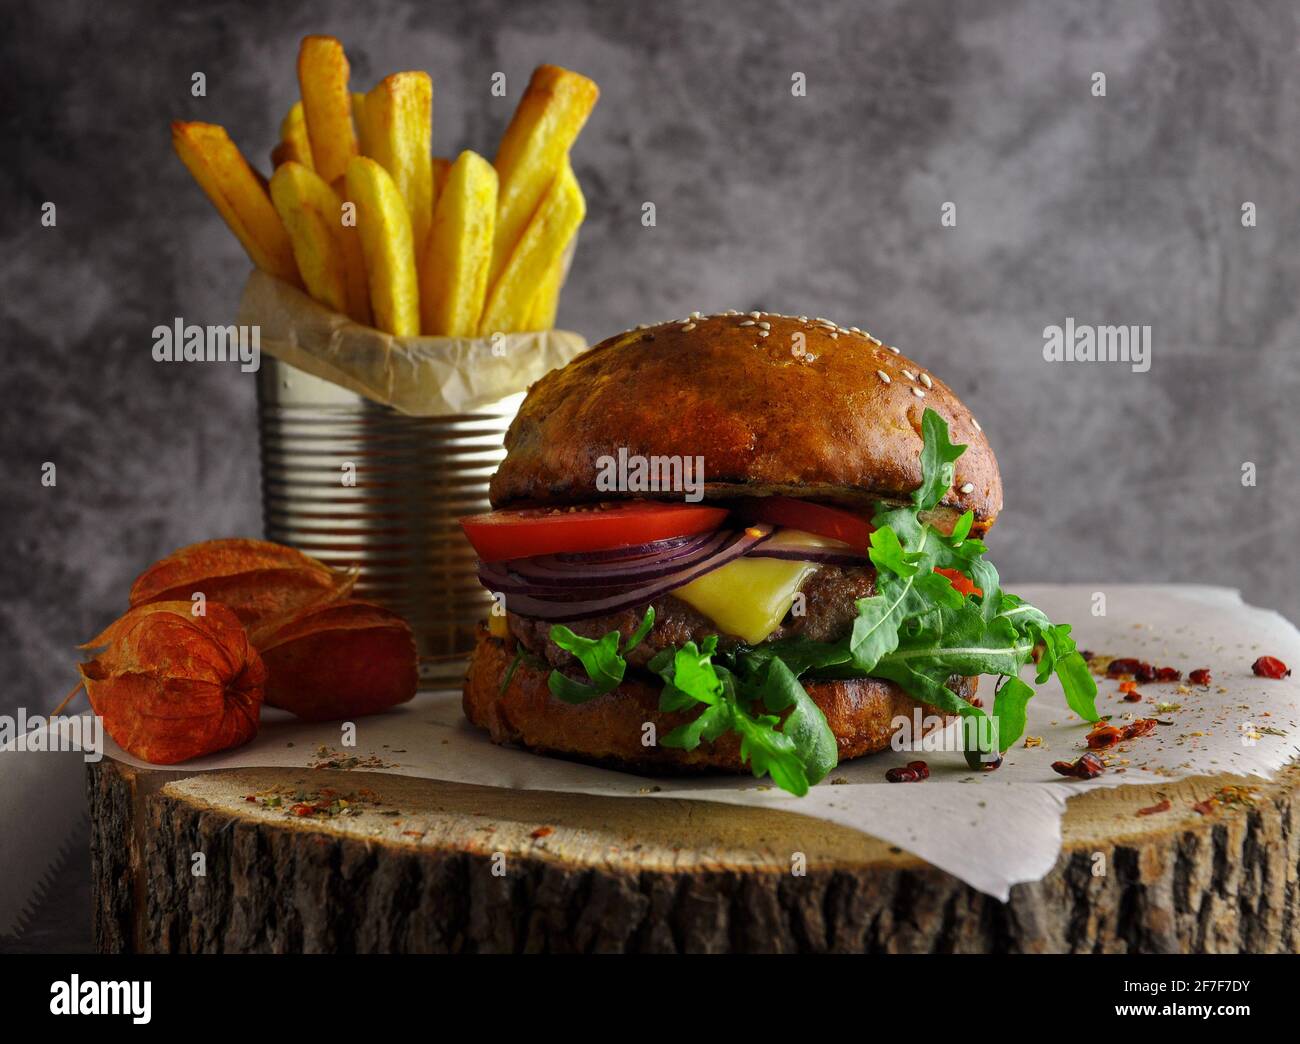 Craft beef burger and fries on a wooden table on a dark background. Stock Photo